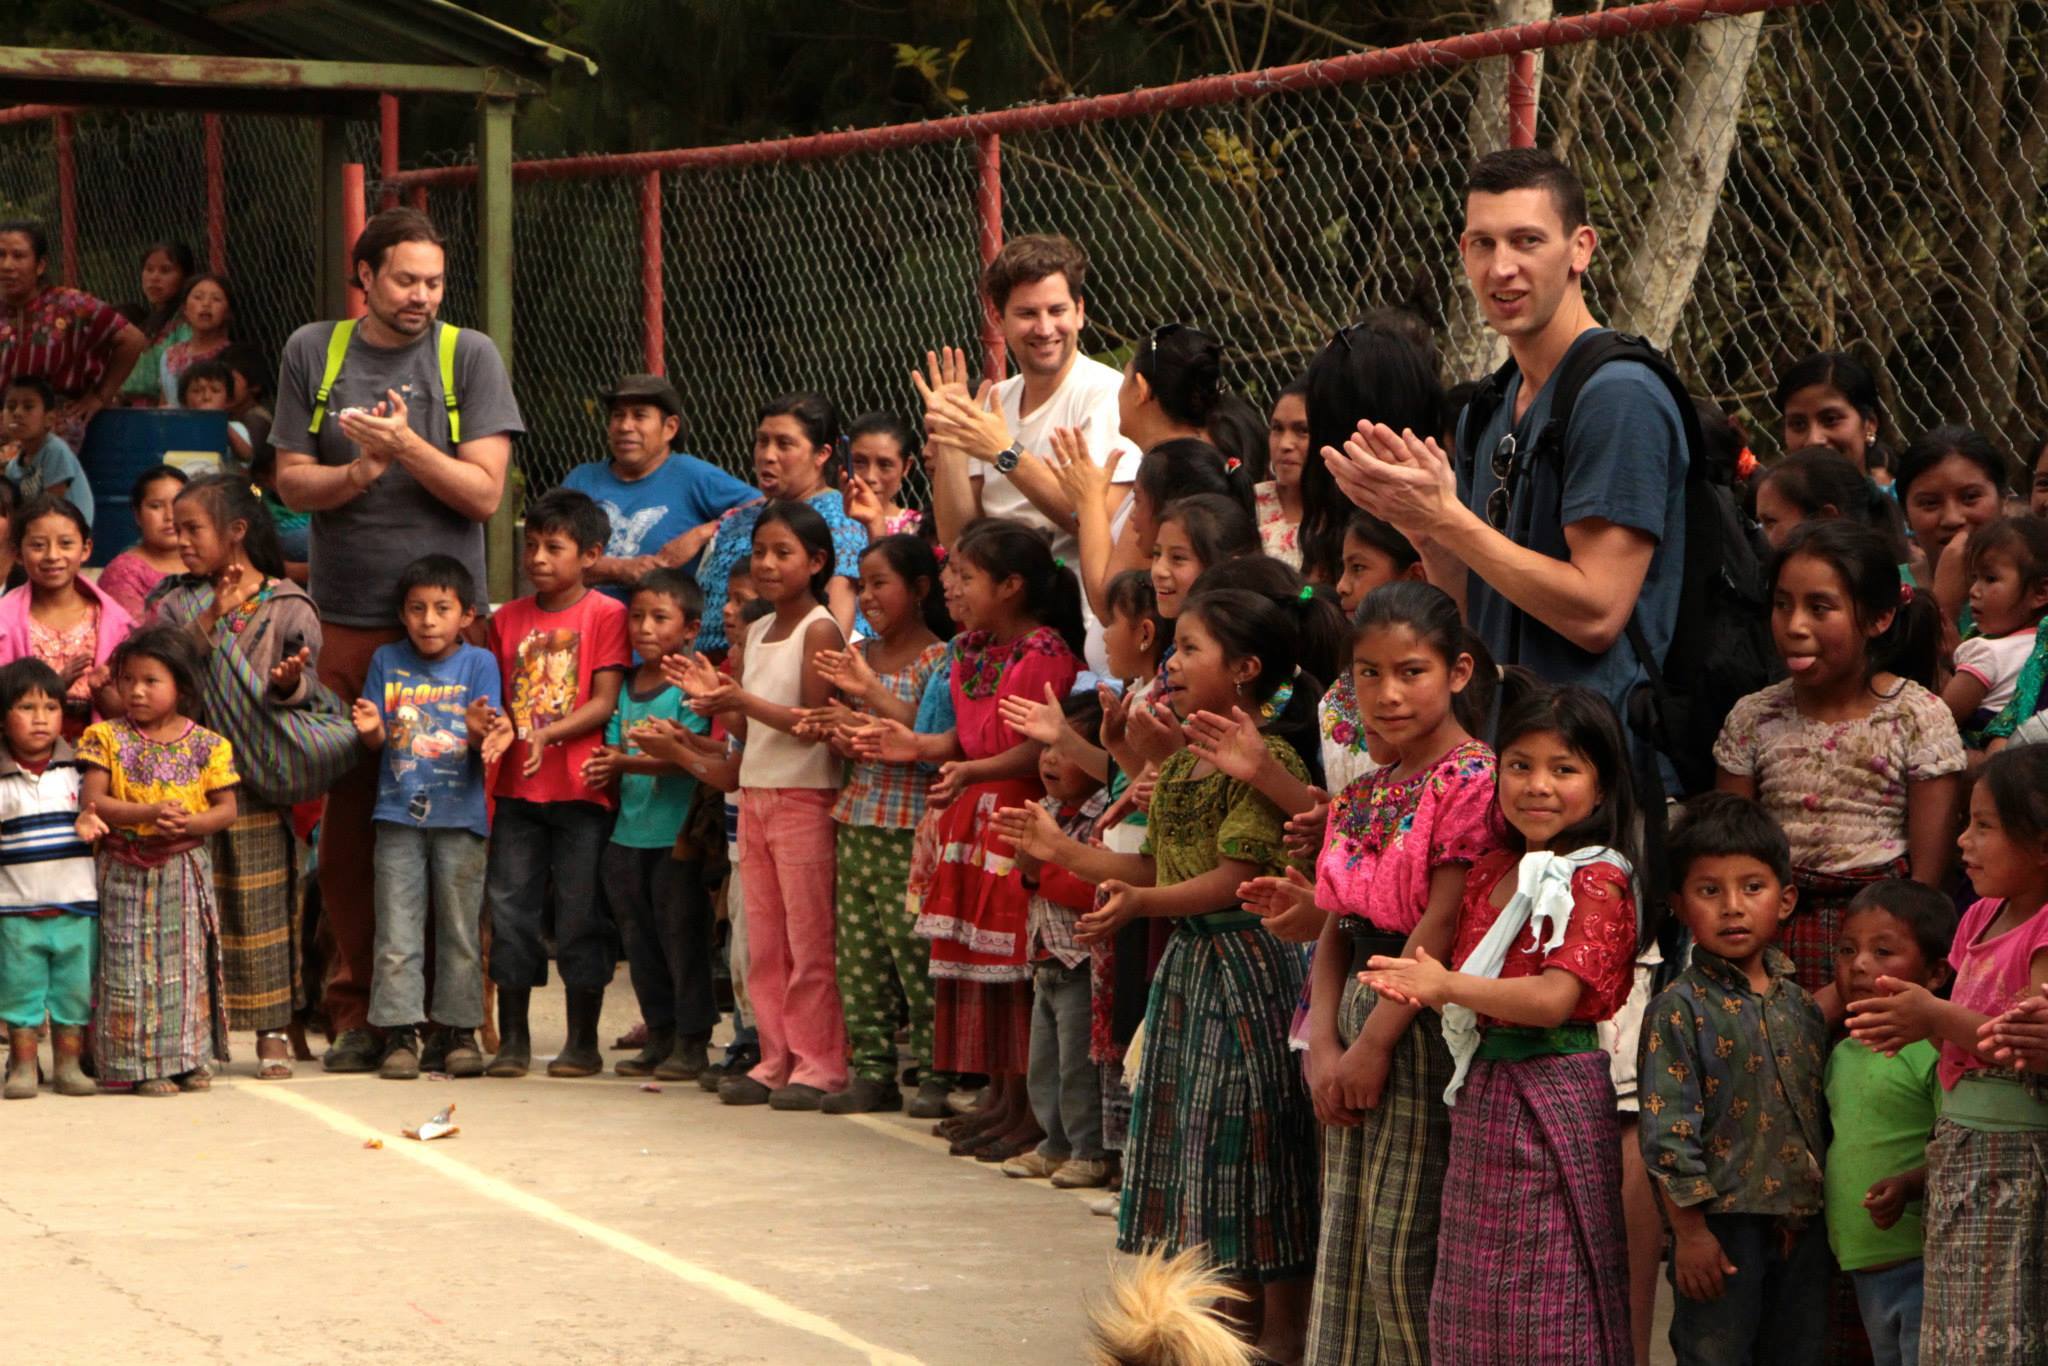 Playing with the local kids in Guatemala